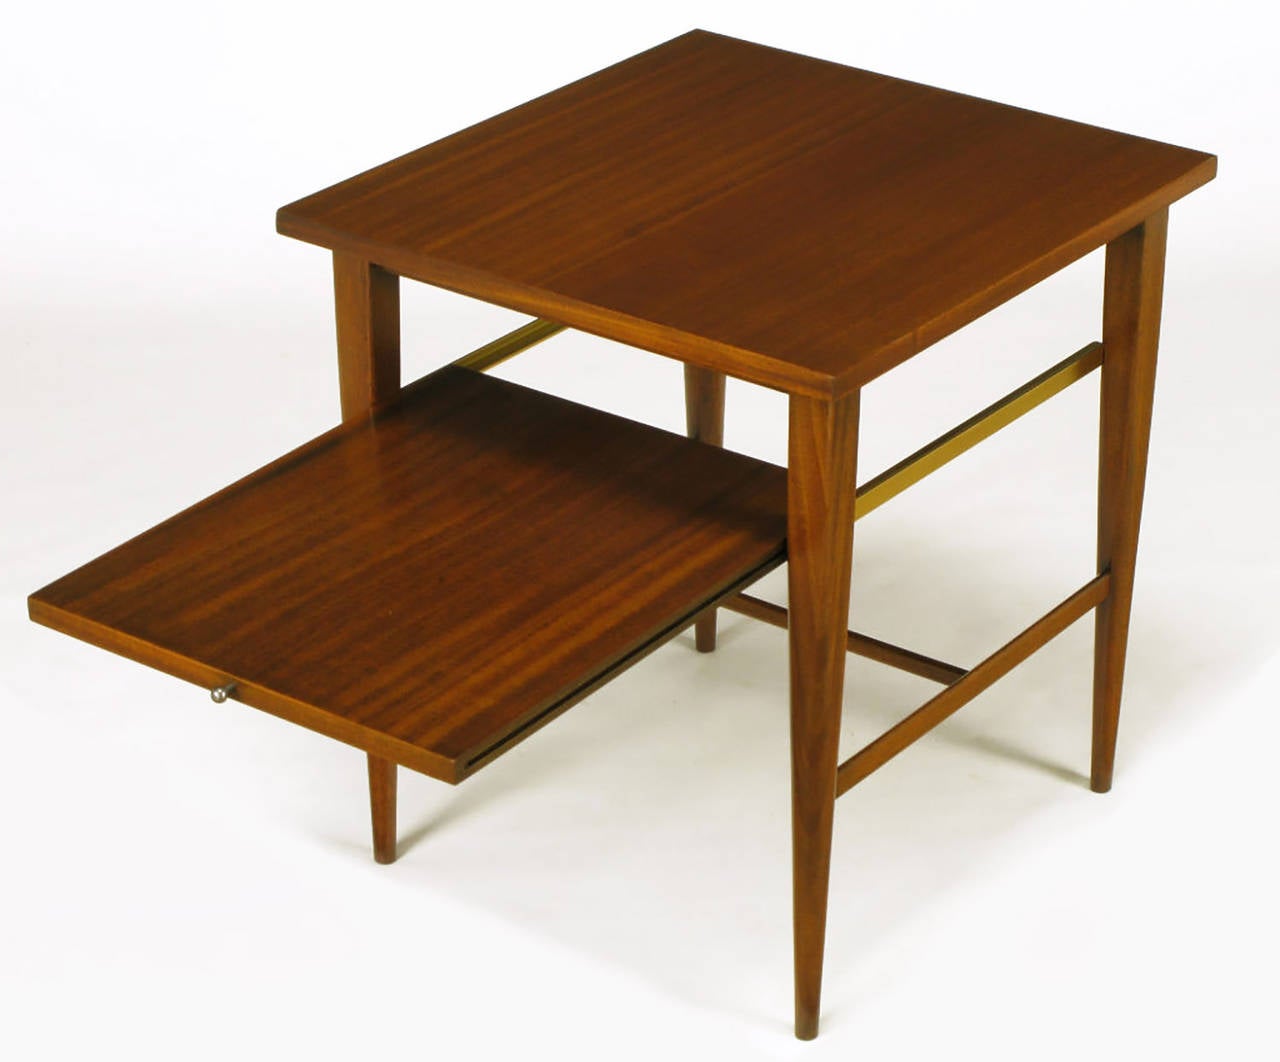 Paul McCobb for Calvin ribbon mahogany side table with H-stretchers, solid tapered mahogany legs and pull-out lower tier. Brass glides support the second tier that is accessed by a nickel ball end pull. Restored to as new condition.